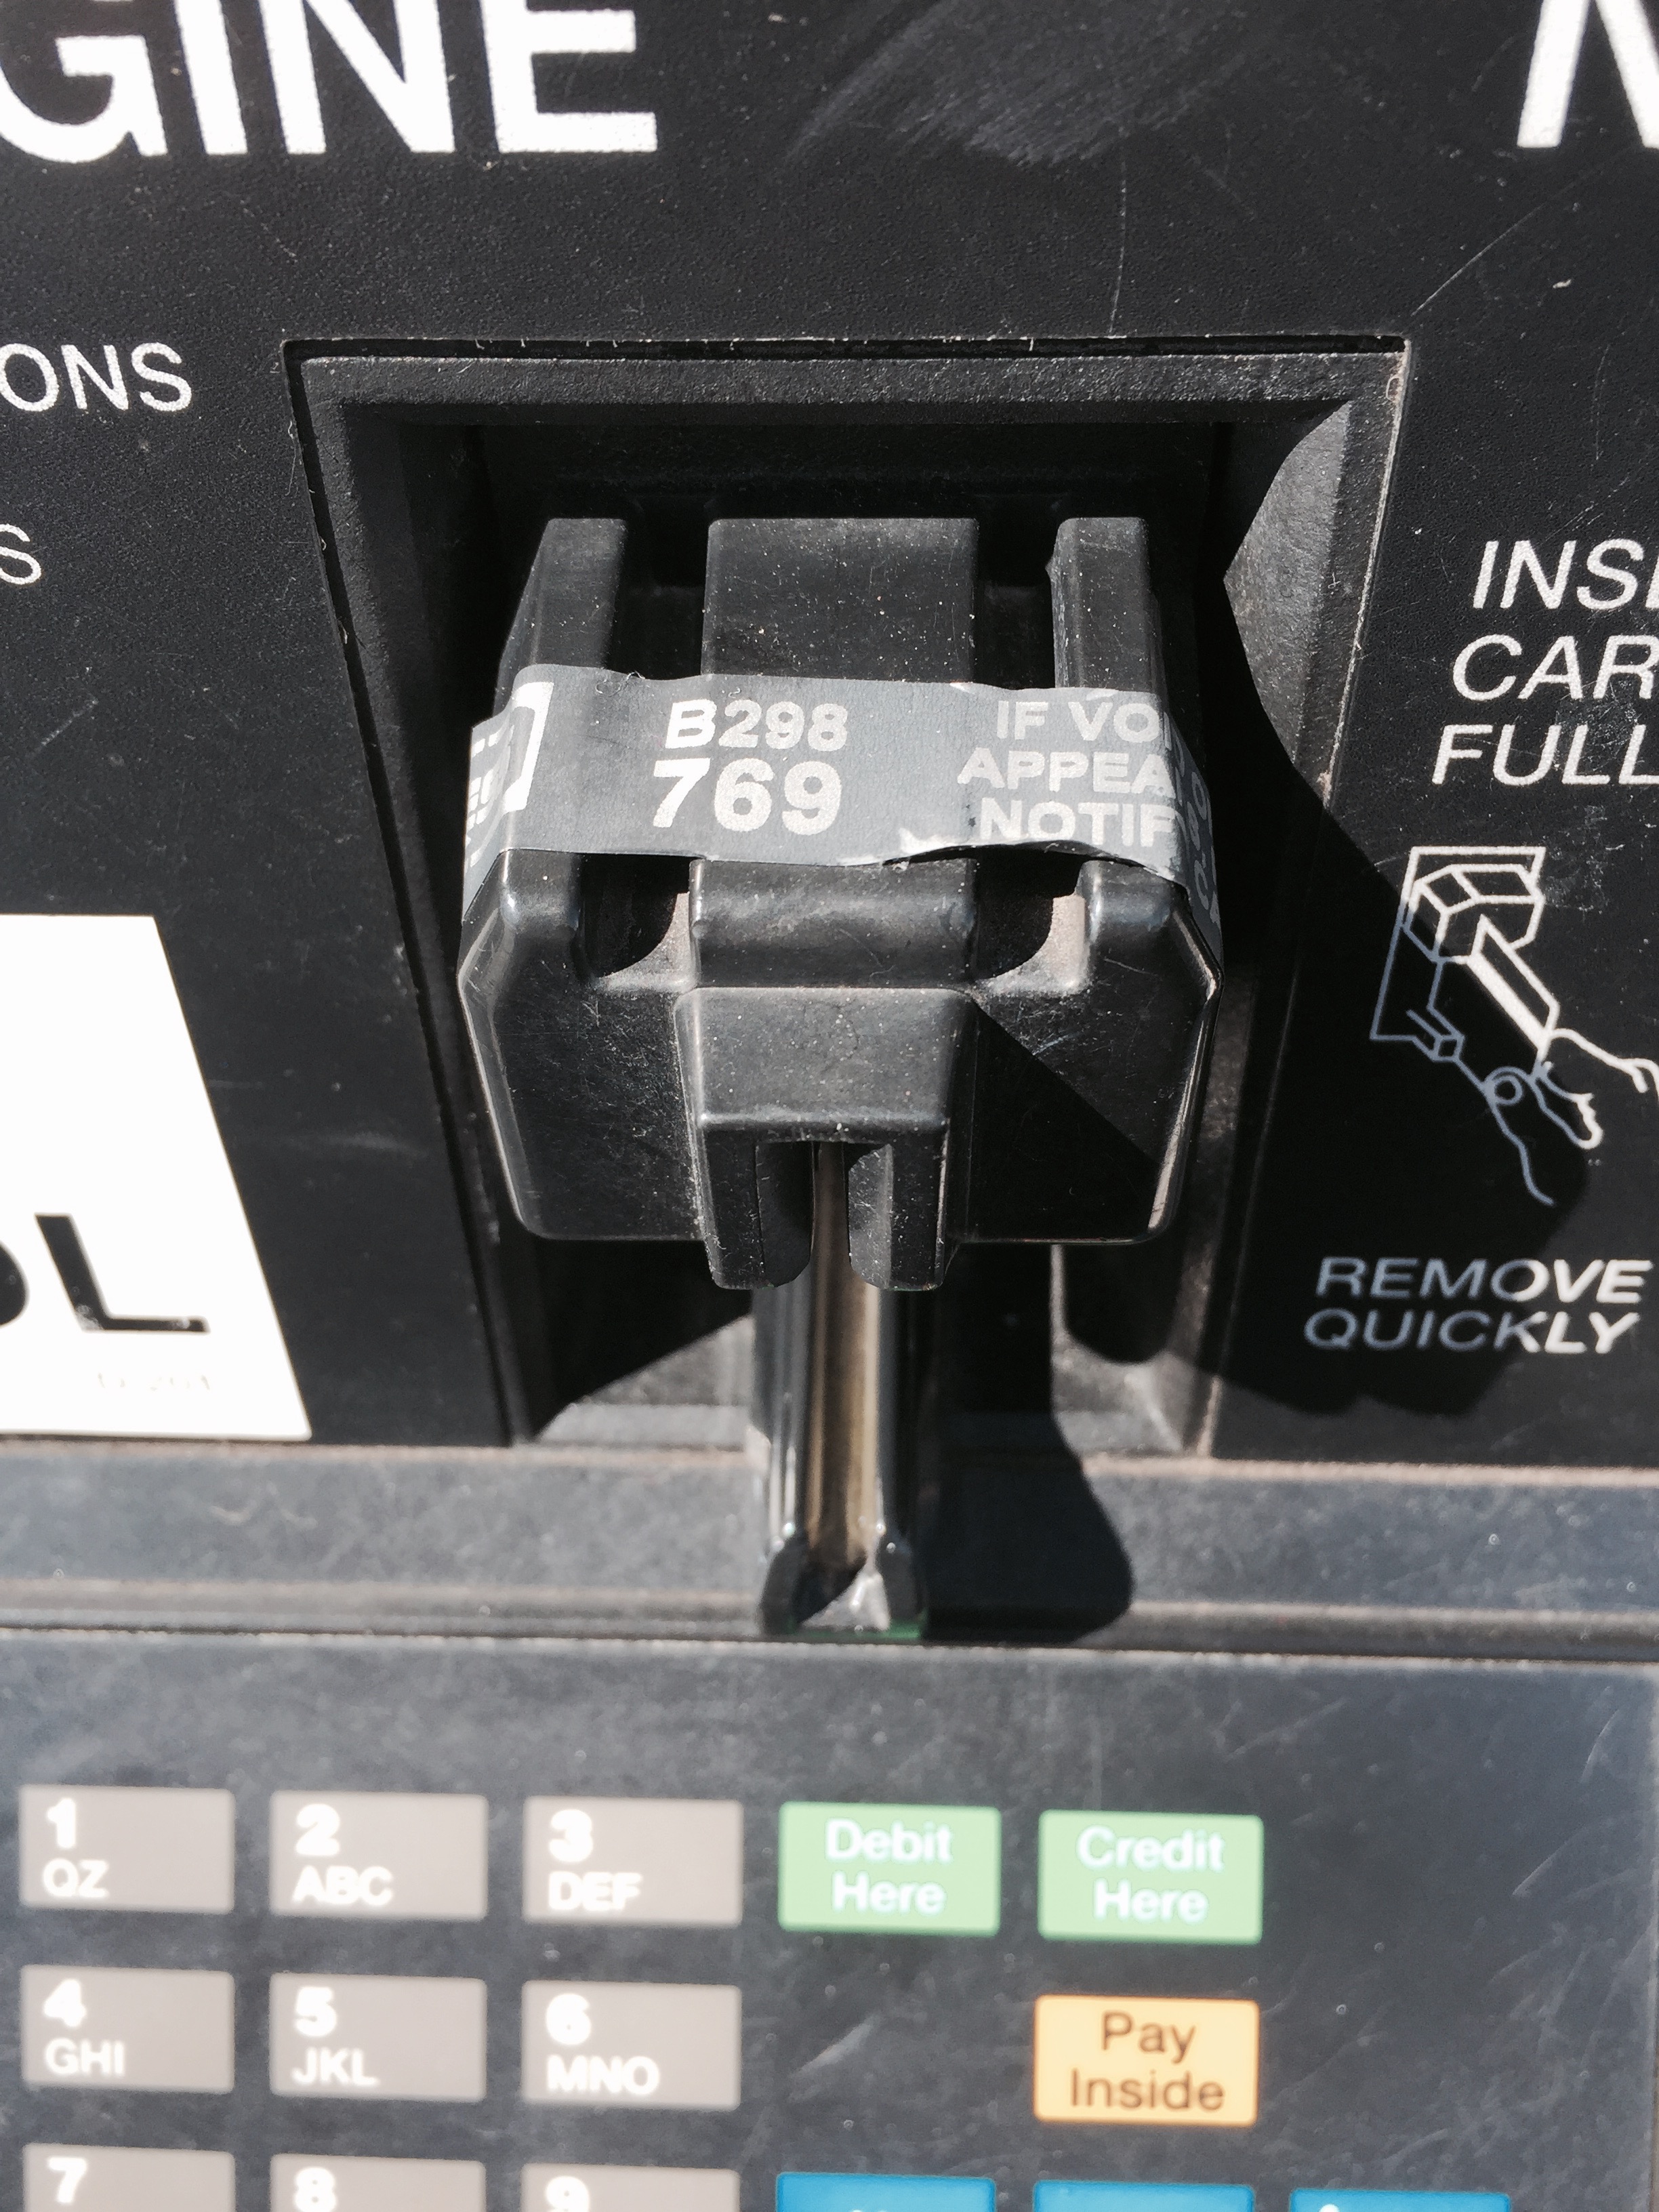 How do credit card skimmers work?